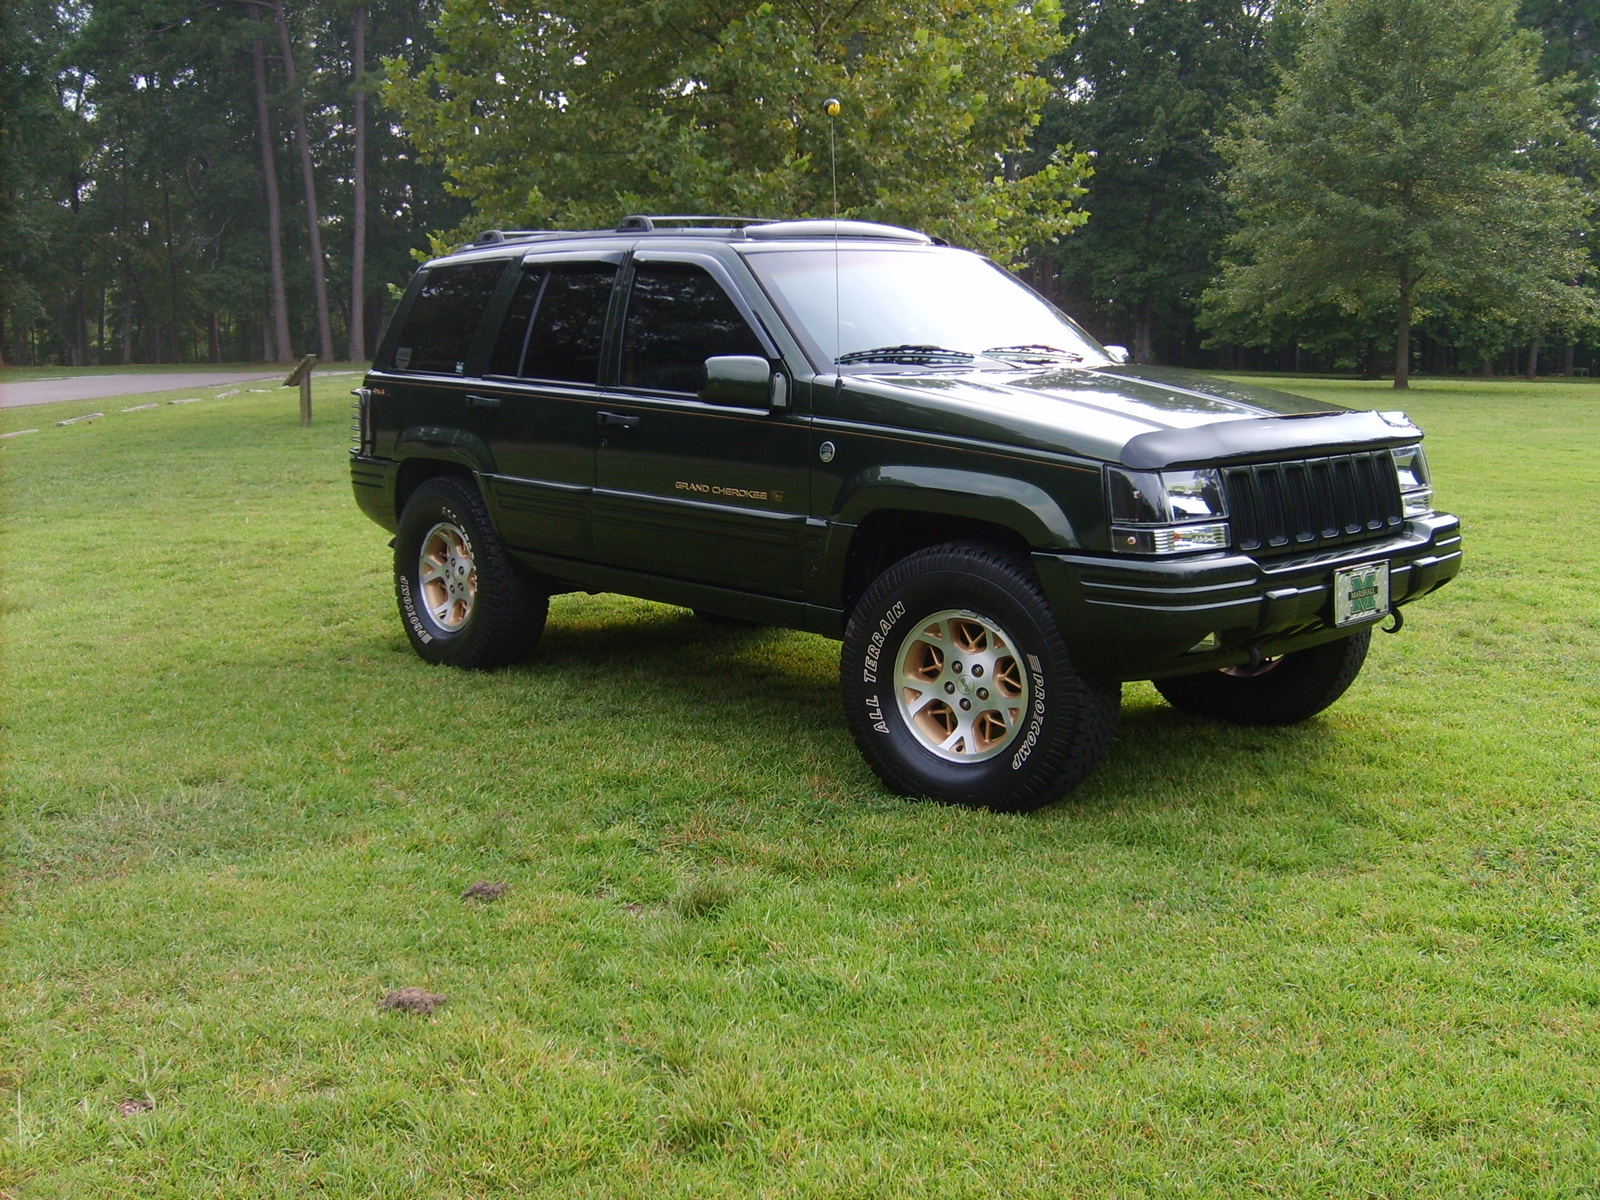 1996 Jeep Grand Cherokee VINs, Configurations, MSRP